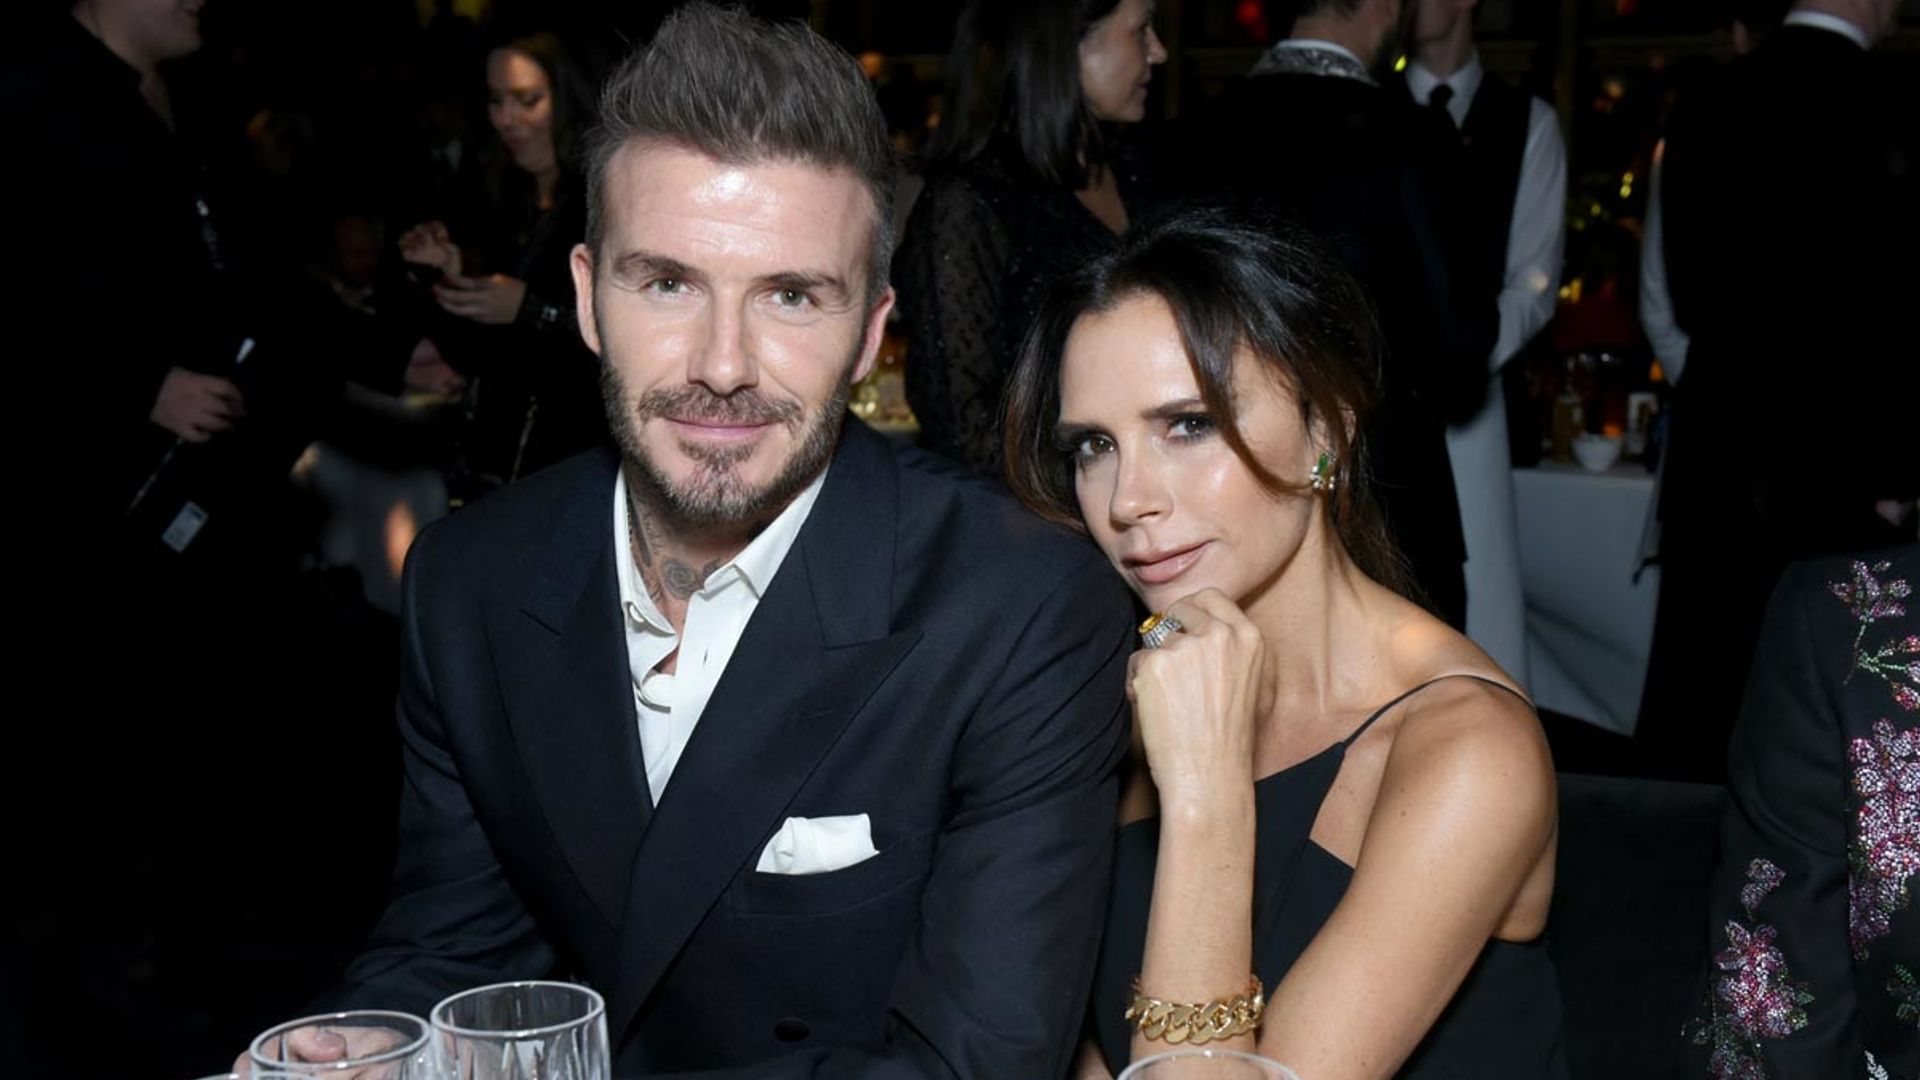 David and Victoria Beckham treat son Cruz to mind-blowing birthday cake - but it's not what you'd expect